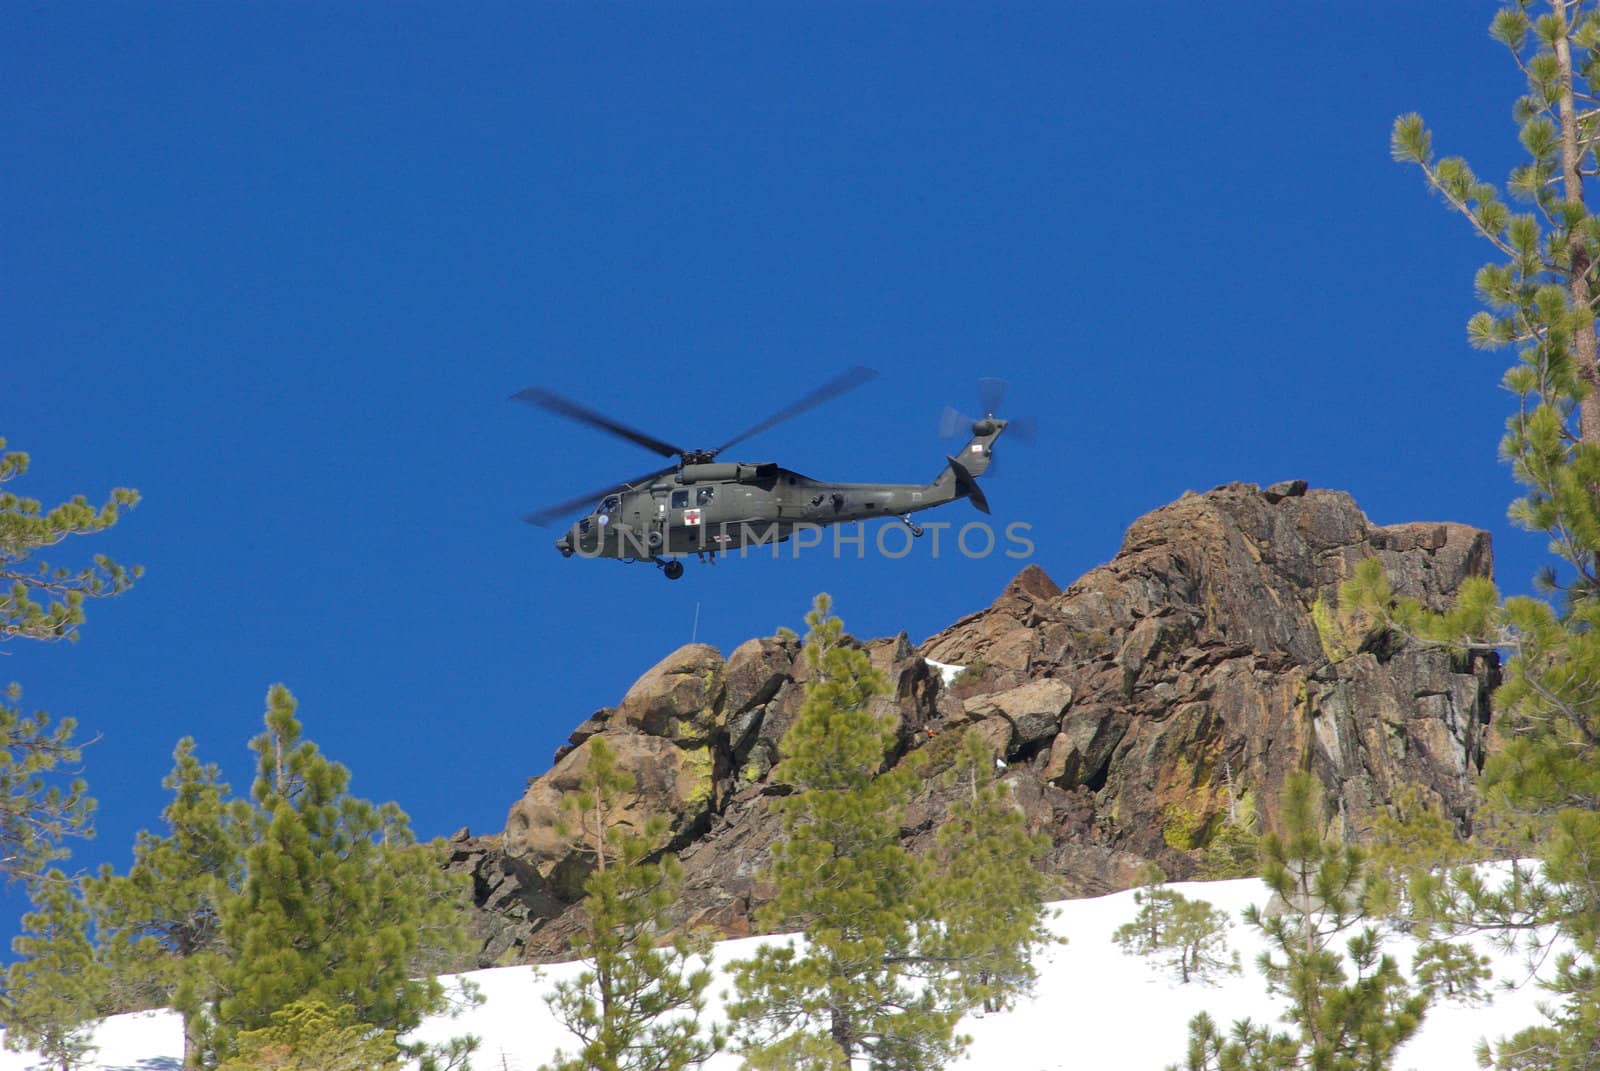 Air rescue by helicopter in the mountains at high altitude